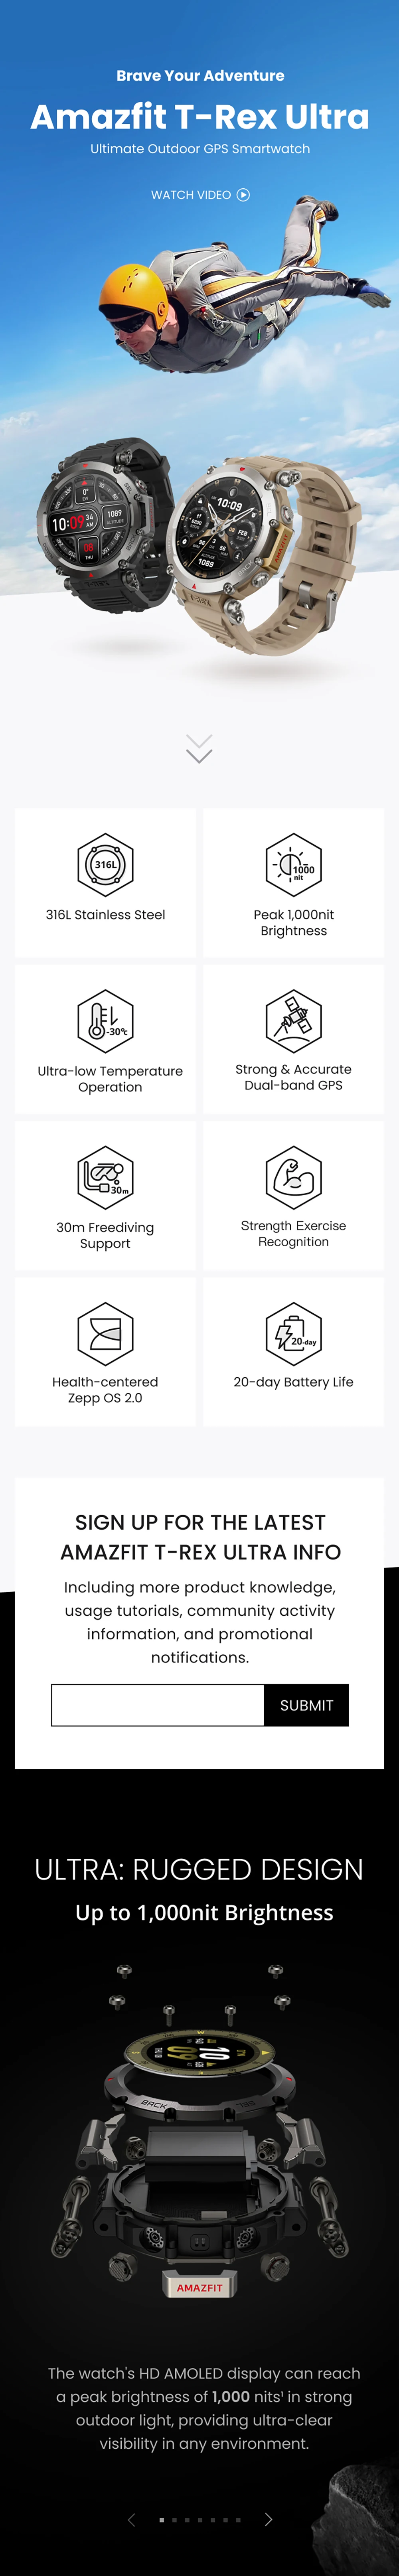 Amazfit T-Rex Ultra: What Goes into an Ultra?